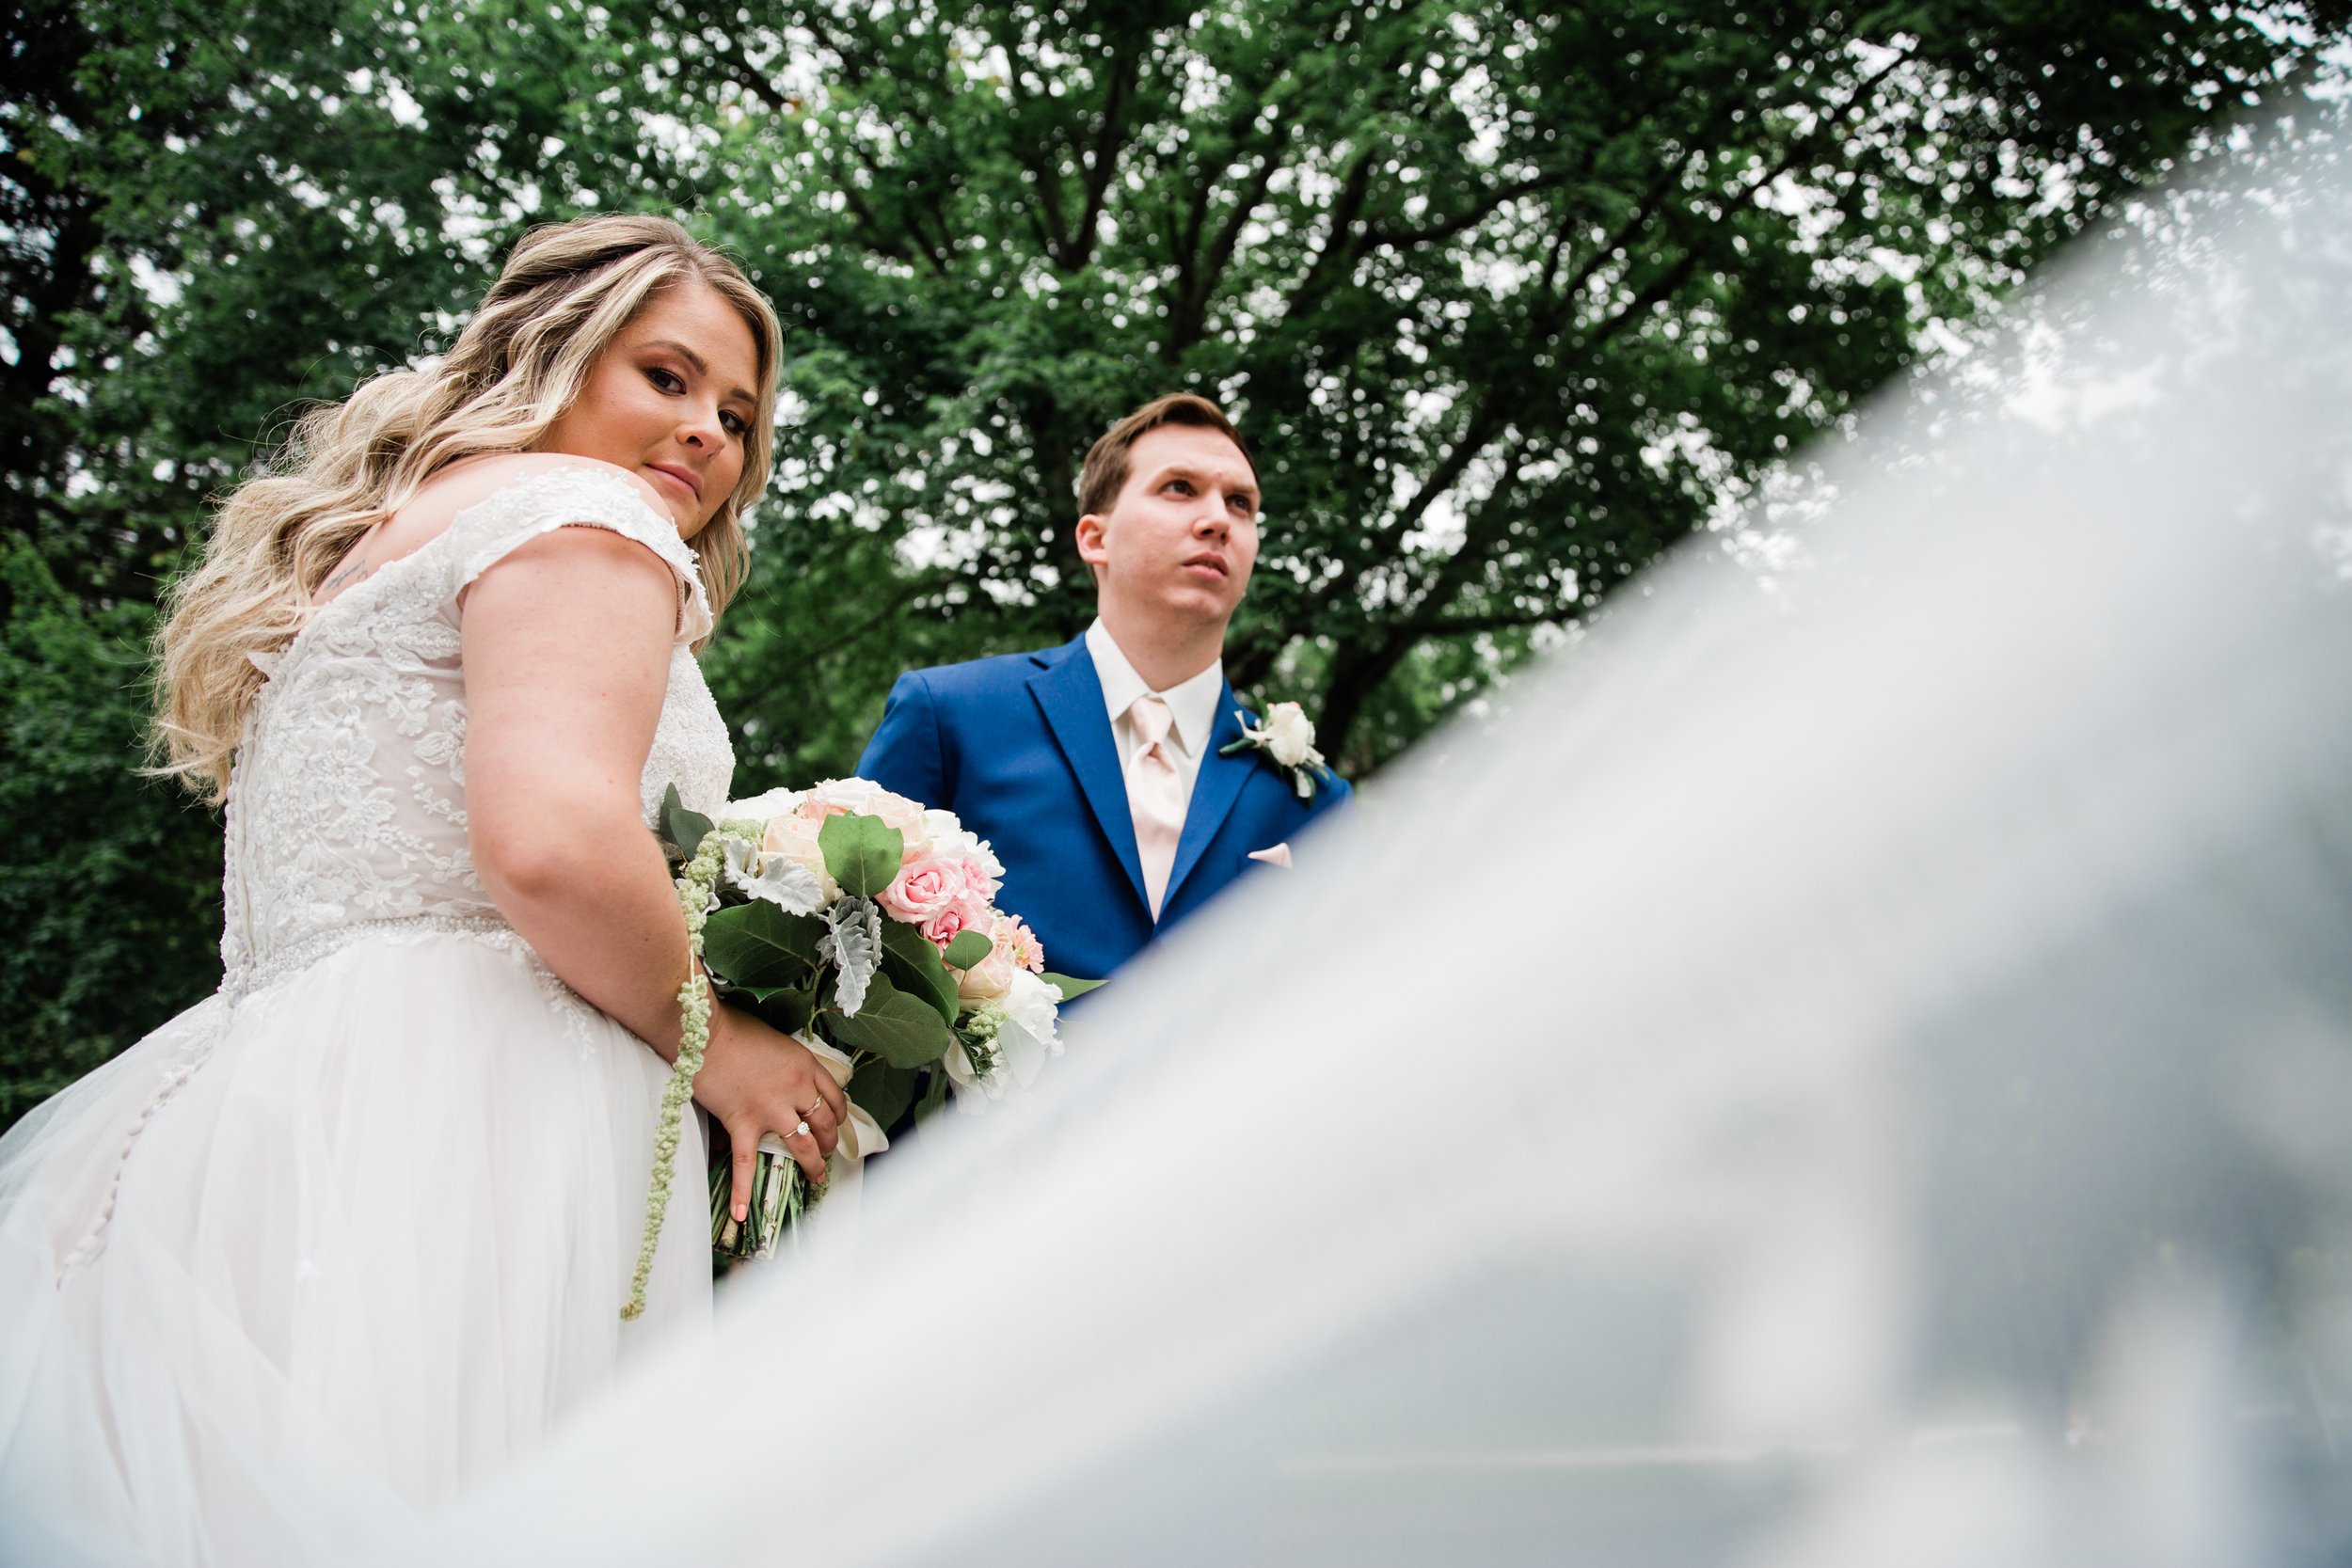 Best Wedding at Hunt Valley Country Club Creative Photographers Megapixels Media Photography-100.jpg